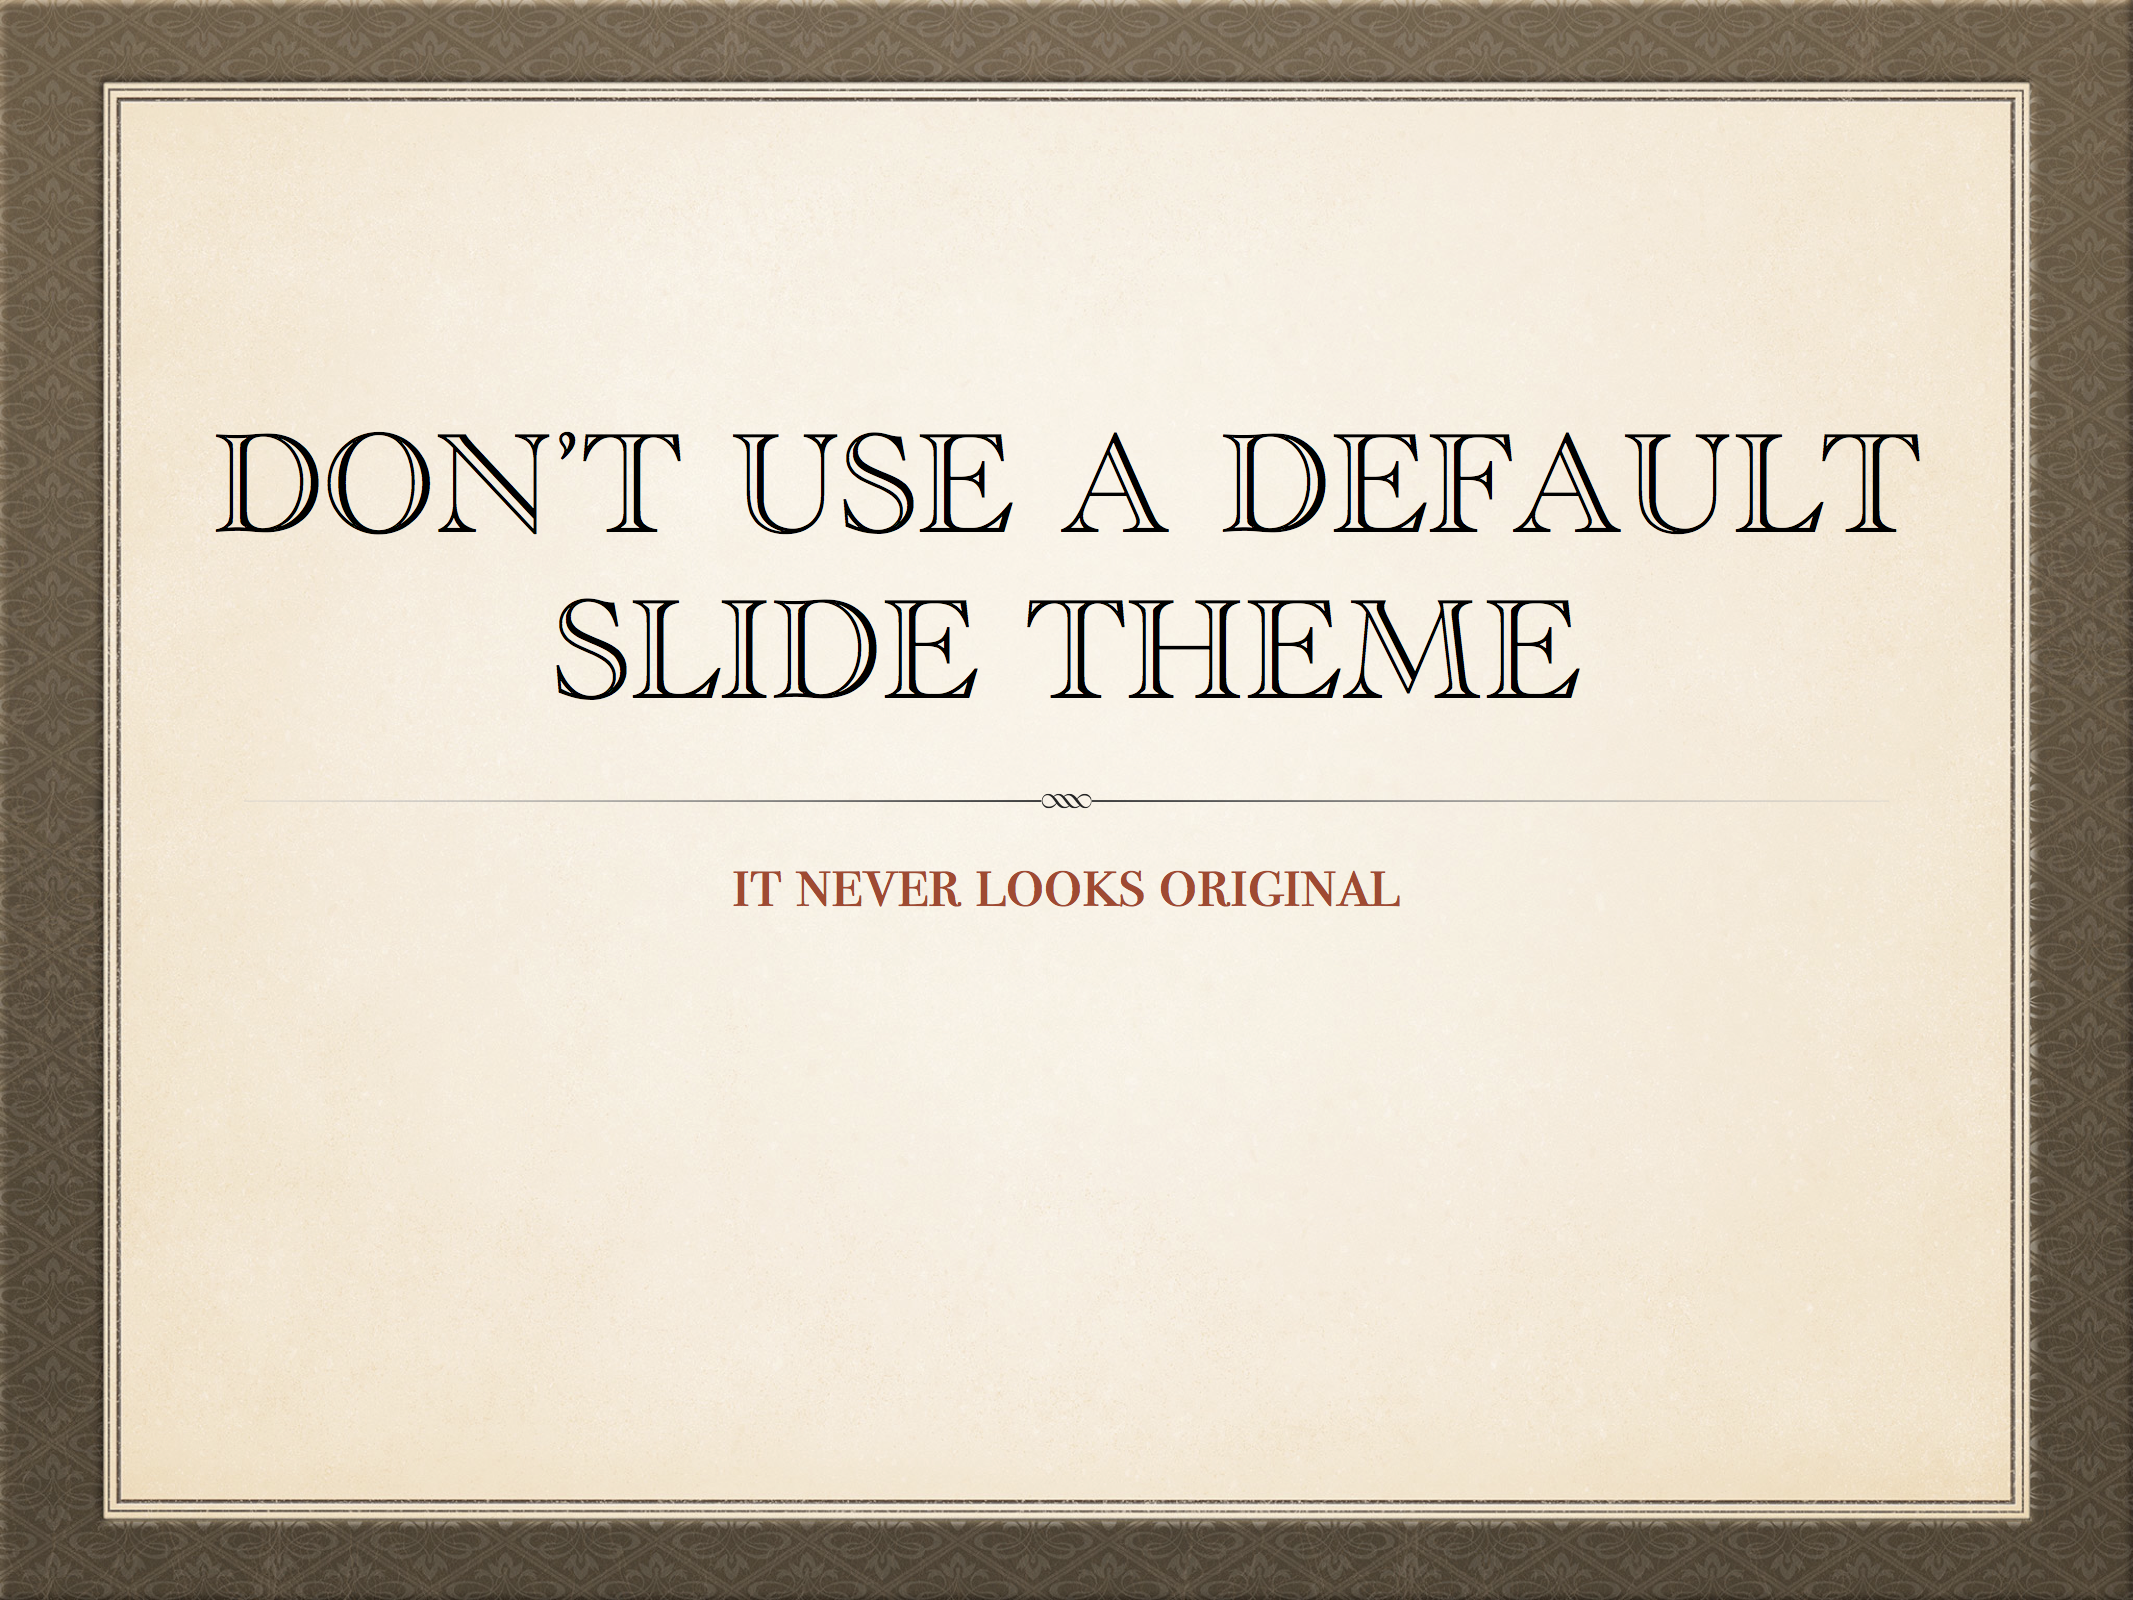 Example of Don't Use a Default Theme